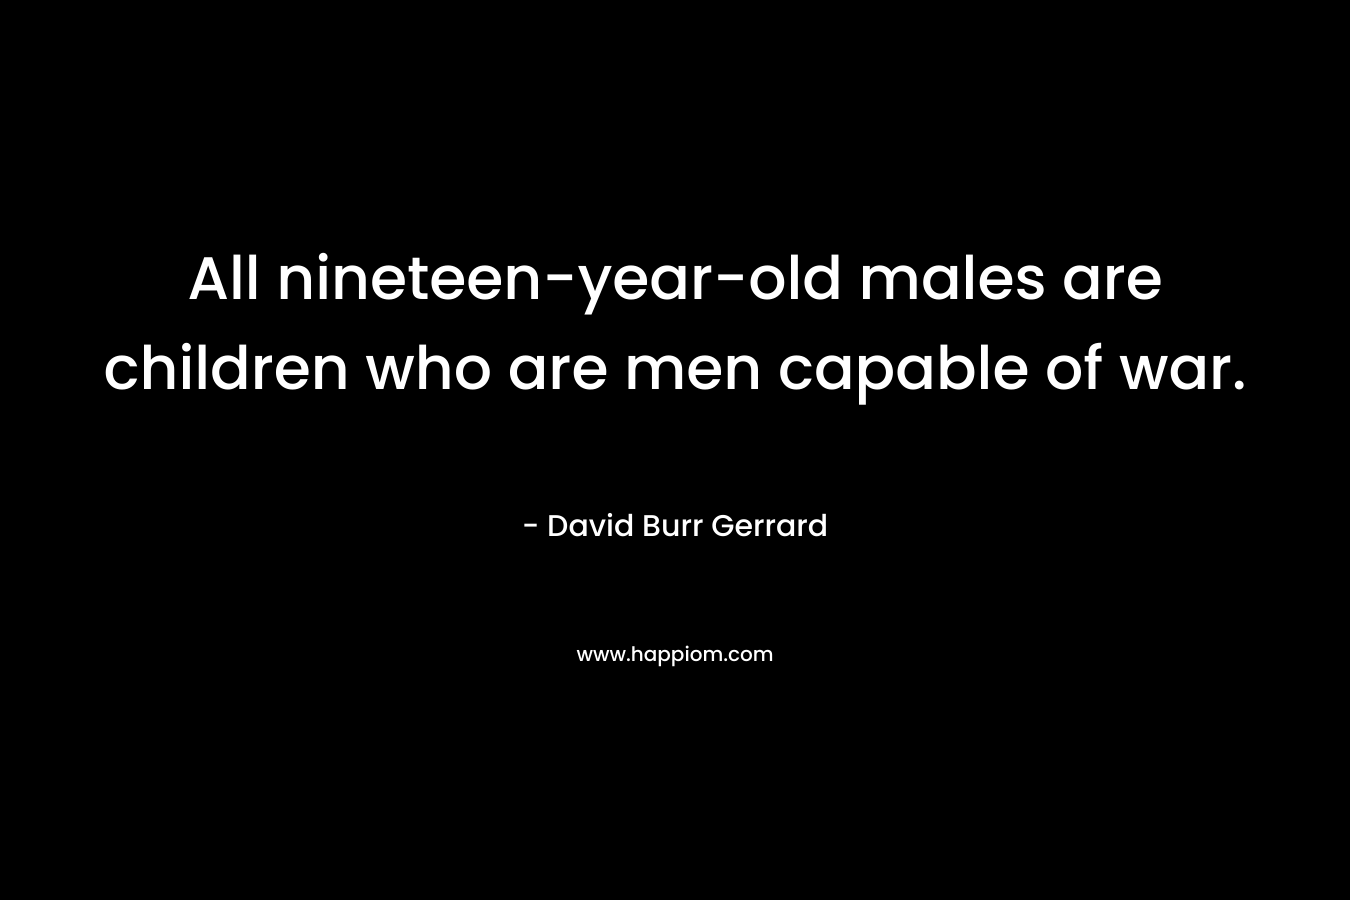 All nineteen-year-old males are children who are men capable of war.